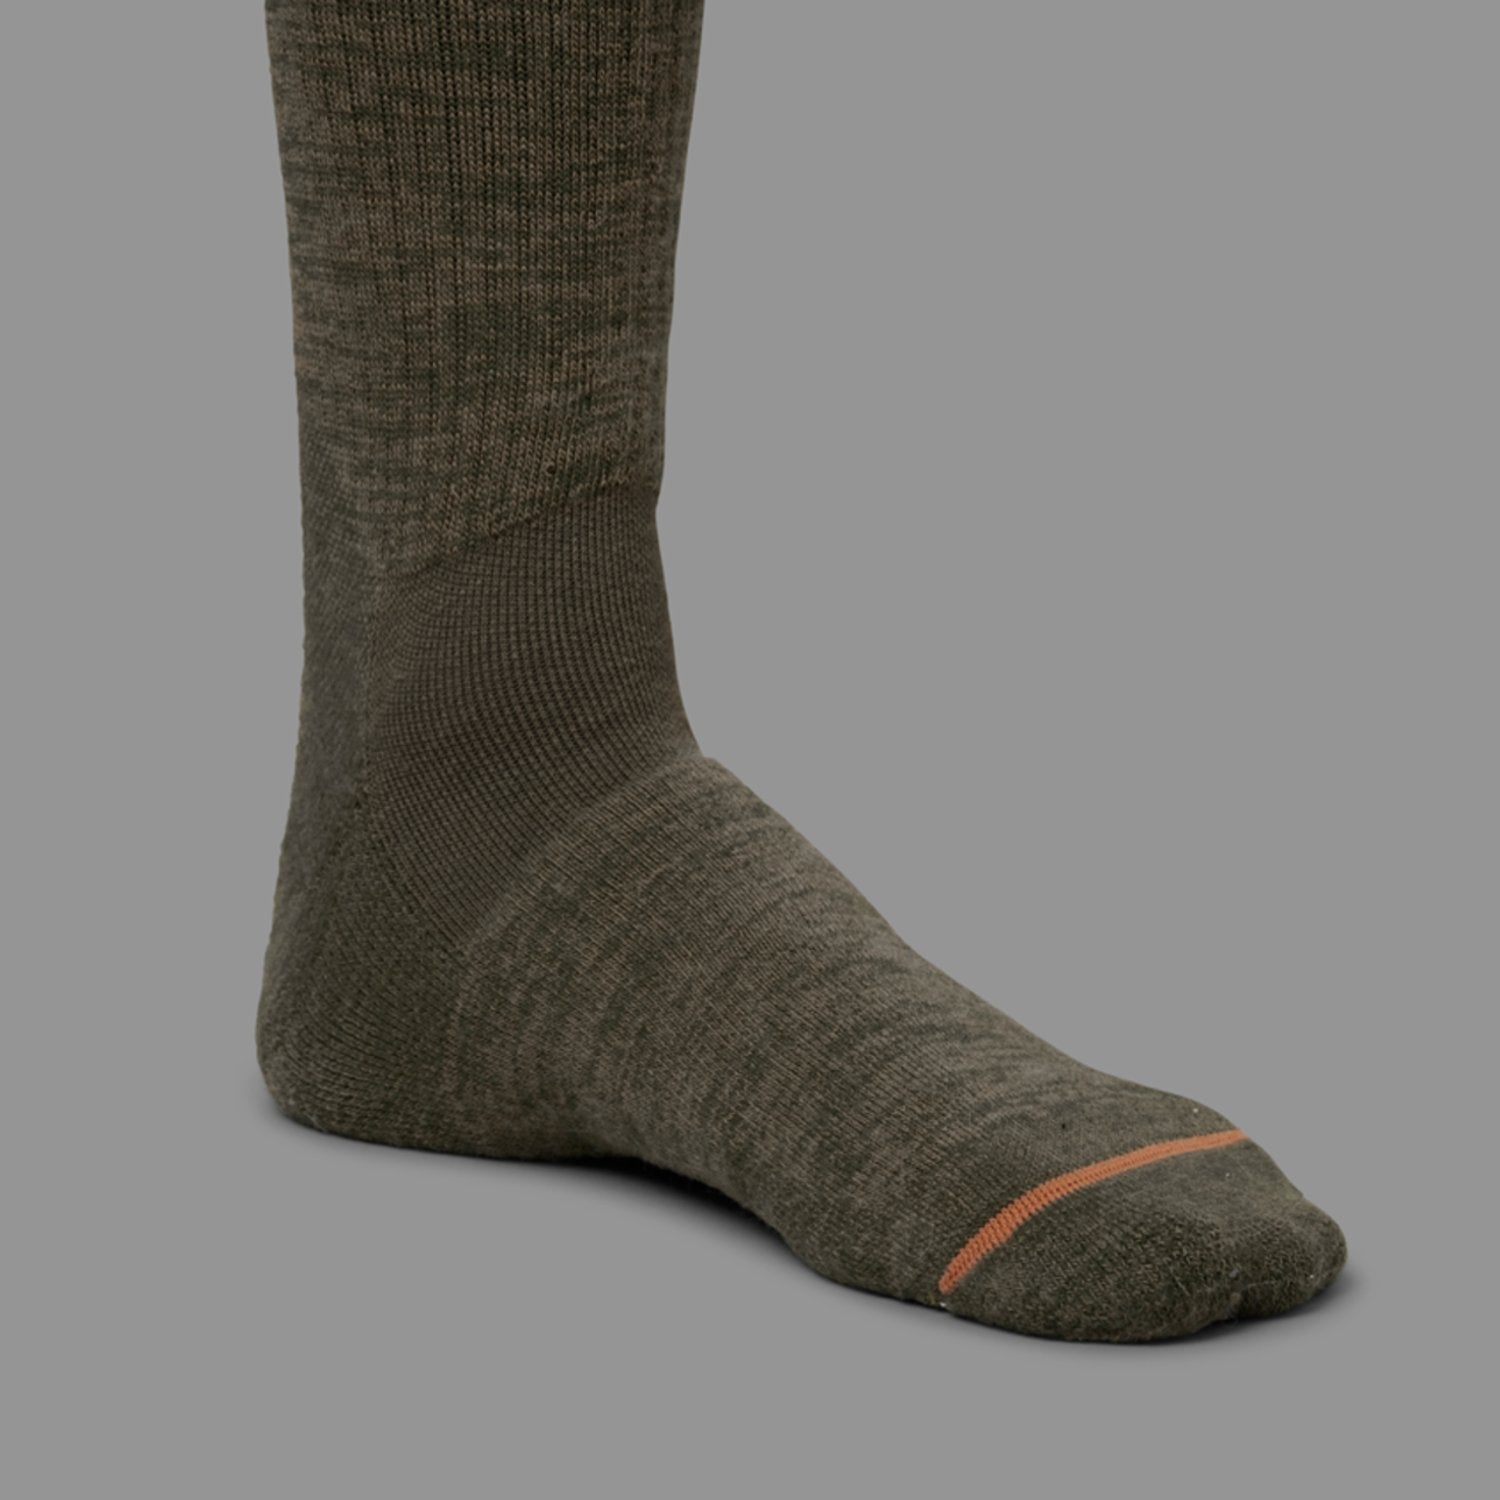 Harkila Pro Hunter 2.0 Short Sock in Willow Green and Shadow Brown